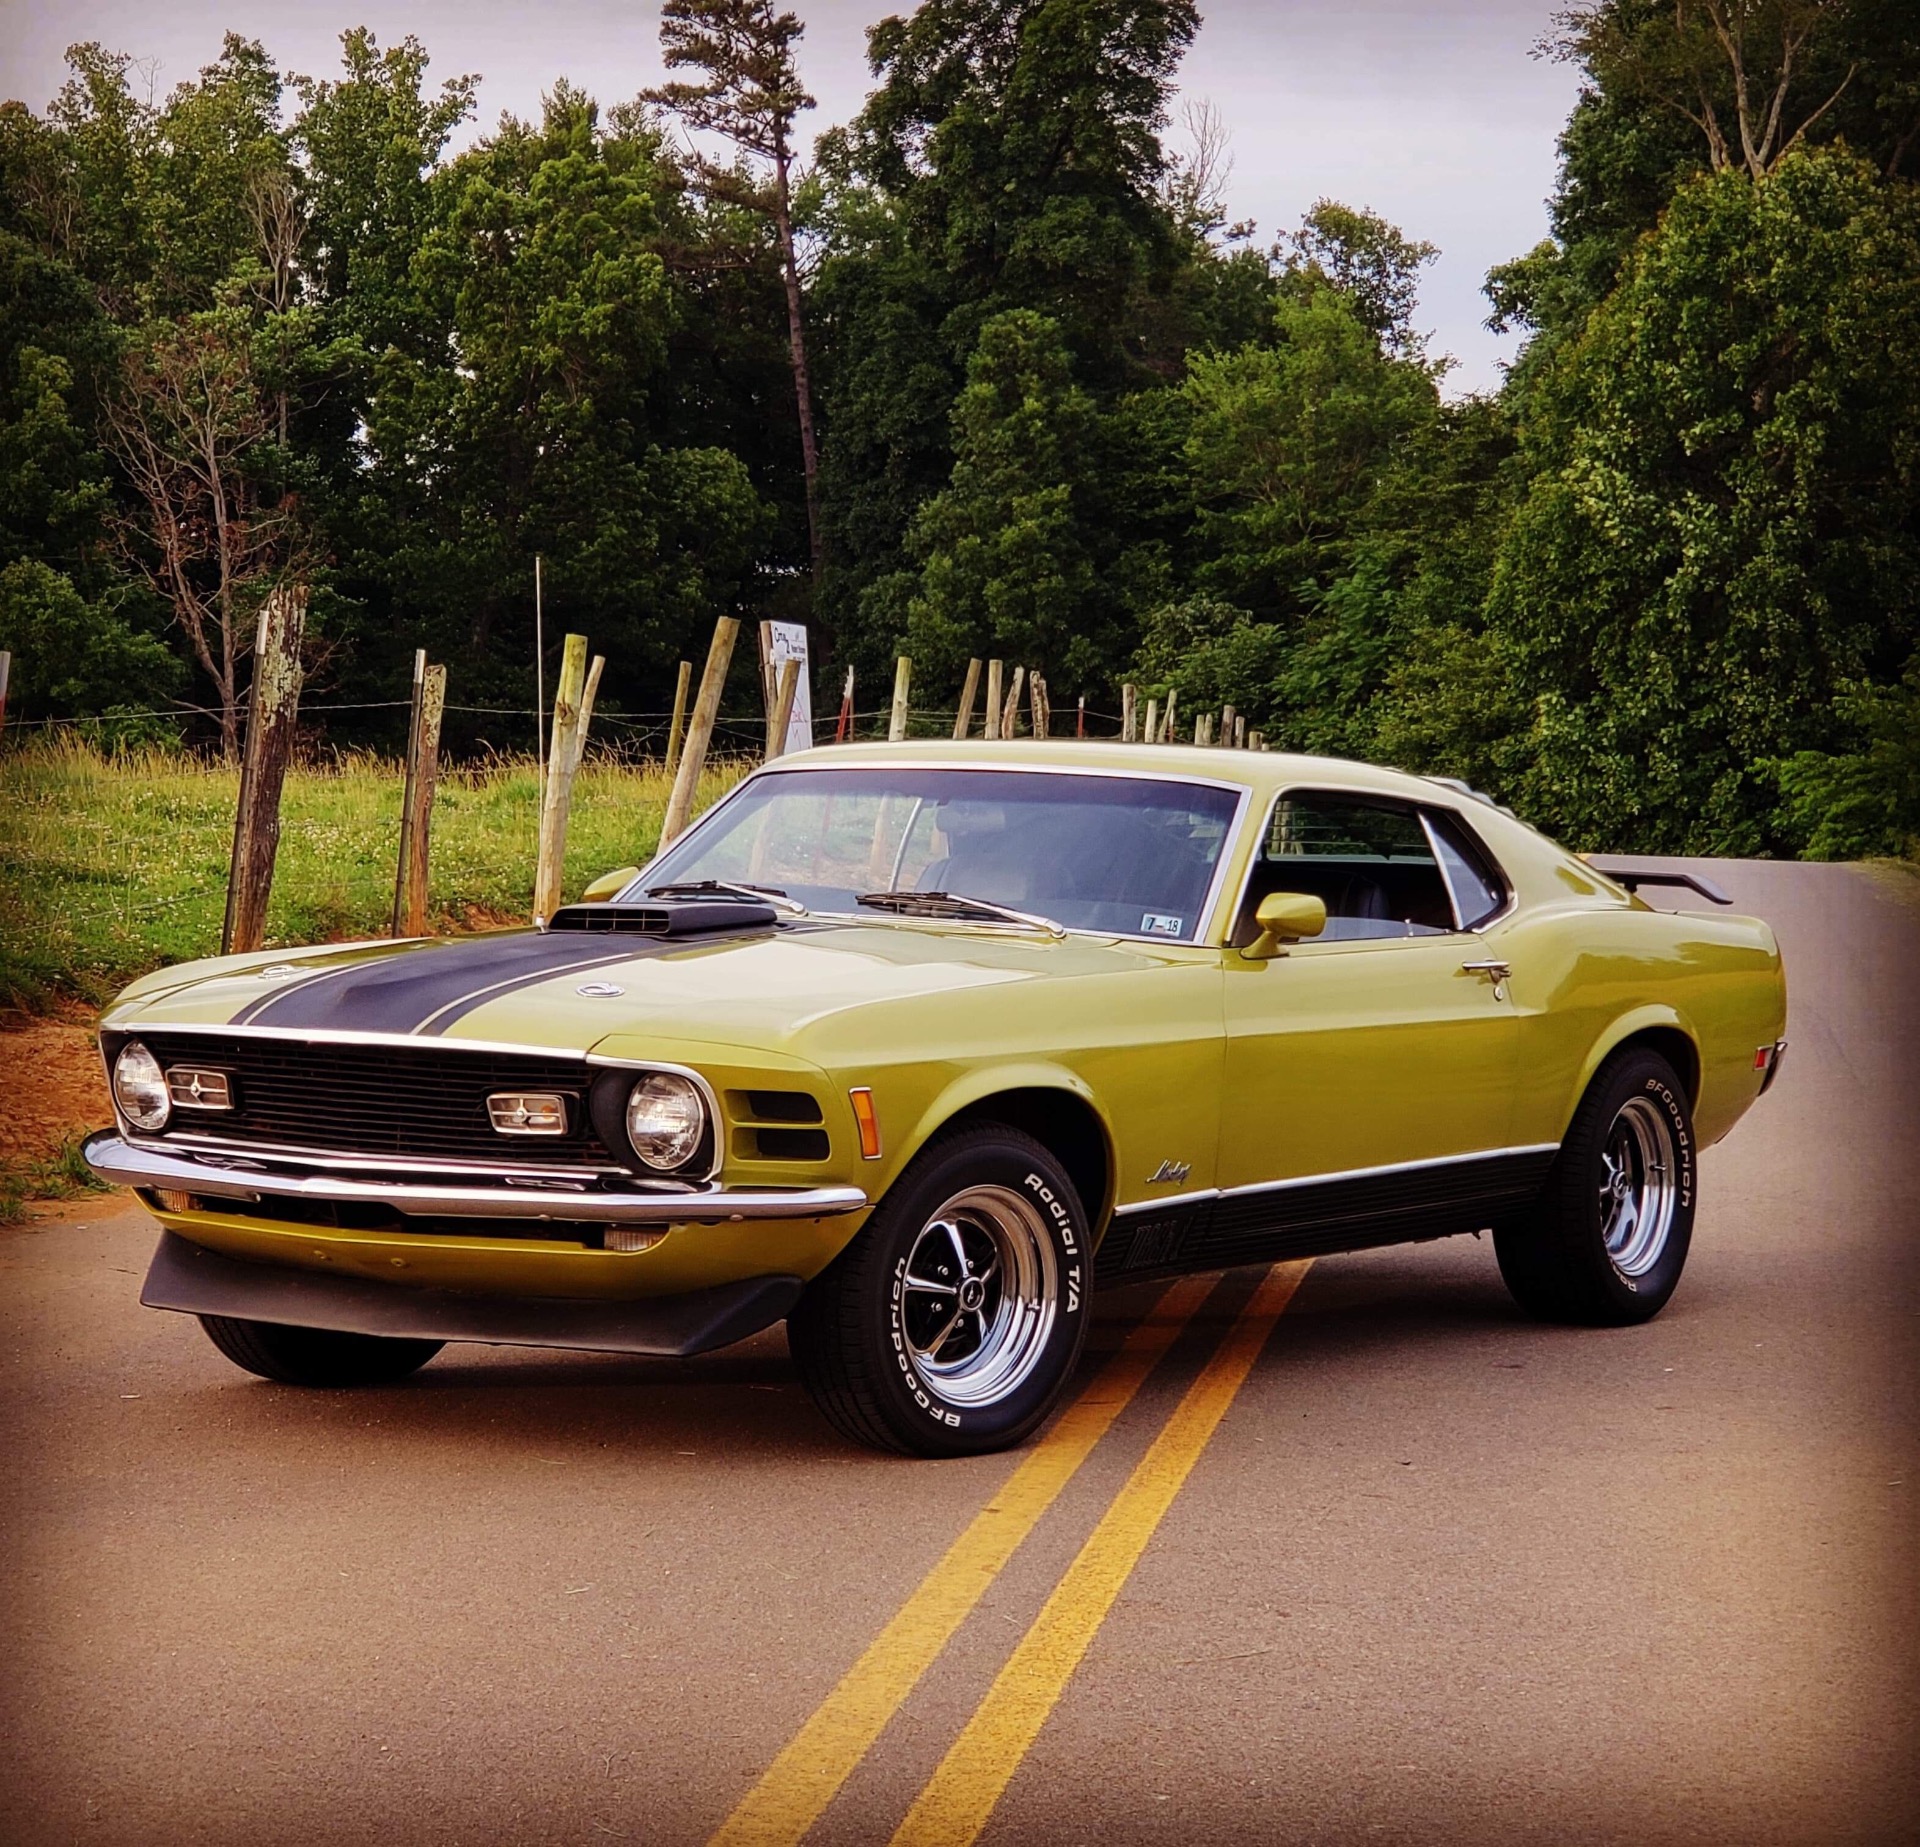 1970 Ford Mustang -MACH 1 Stock # 52728TN for sale near Mundelein, IL ...